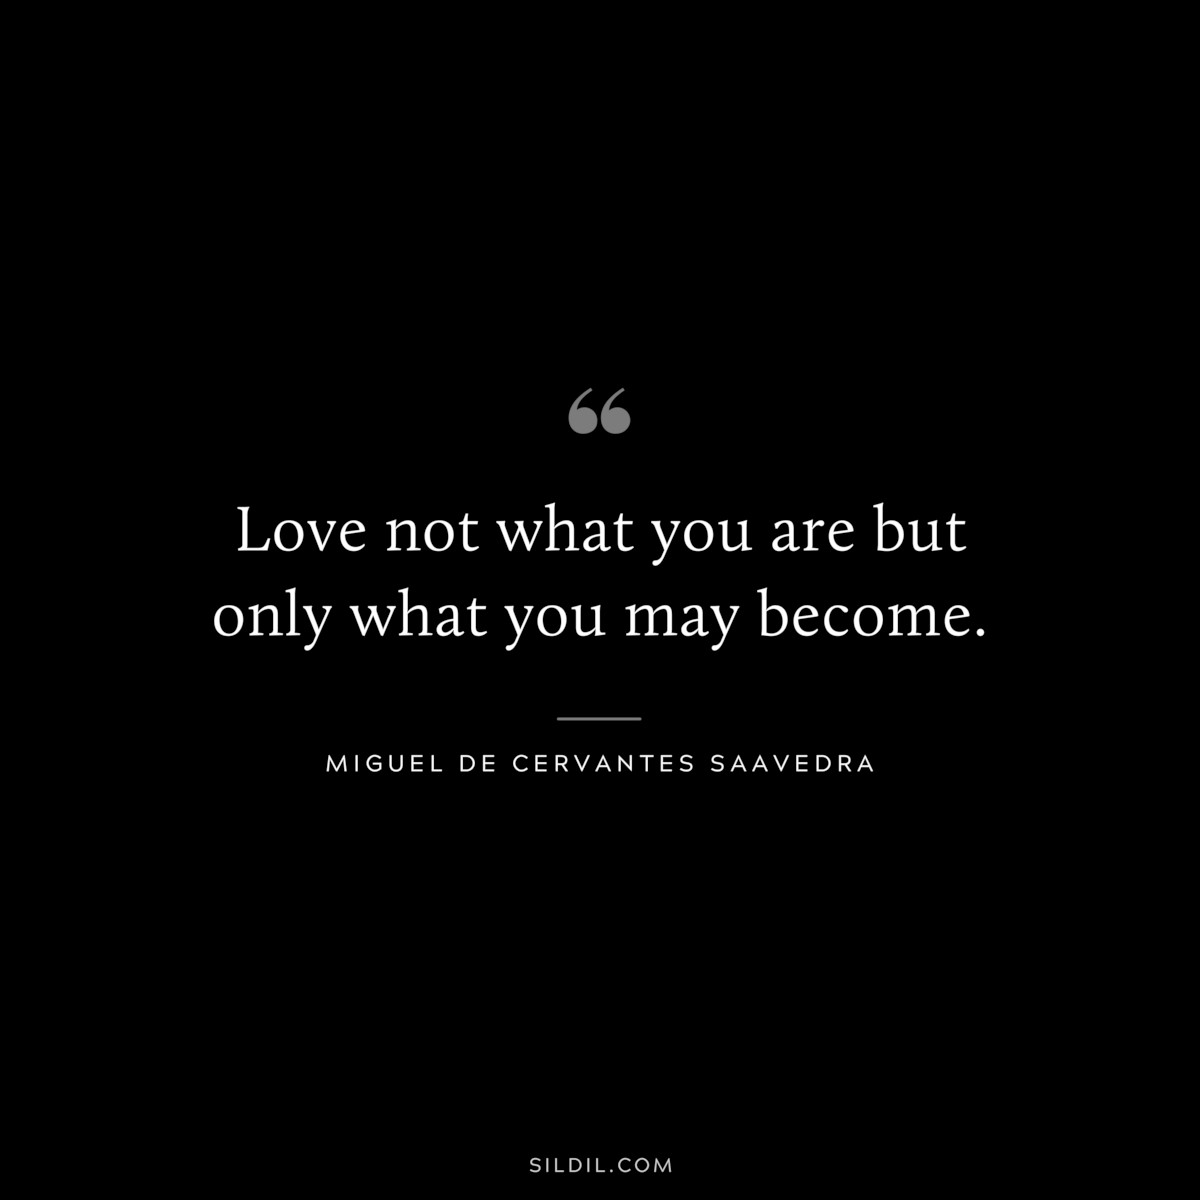 Love not what you are but only what you may become. ― Miguel de Cervantes Saavedra